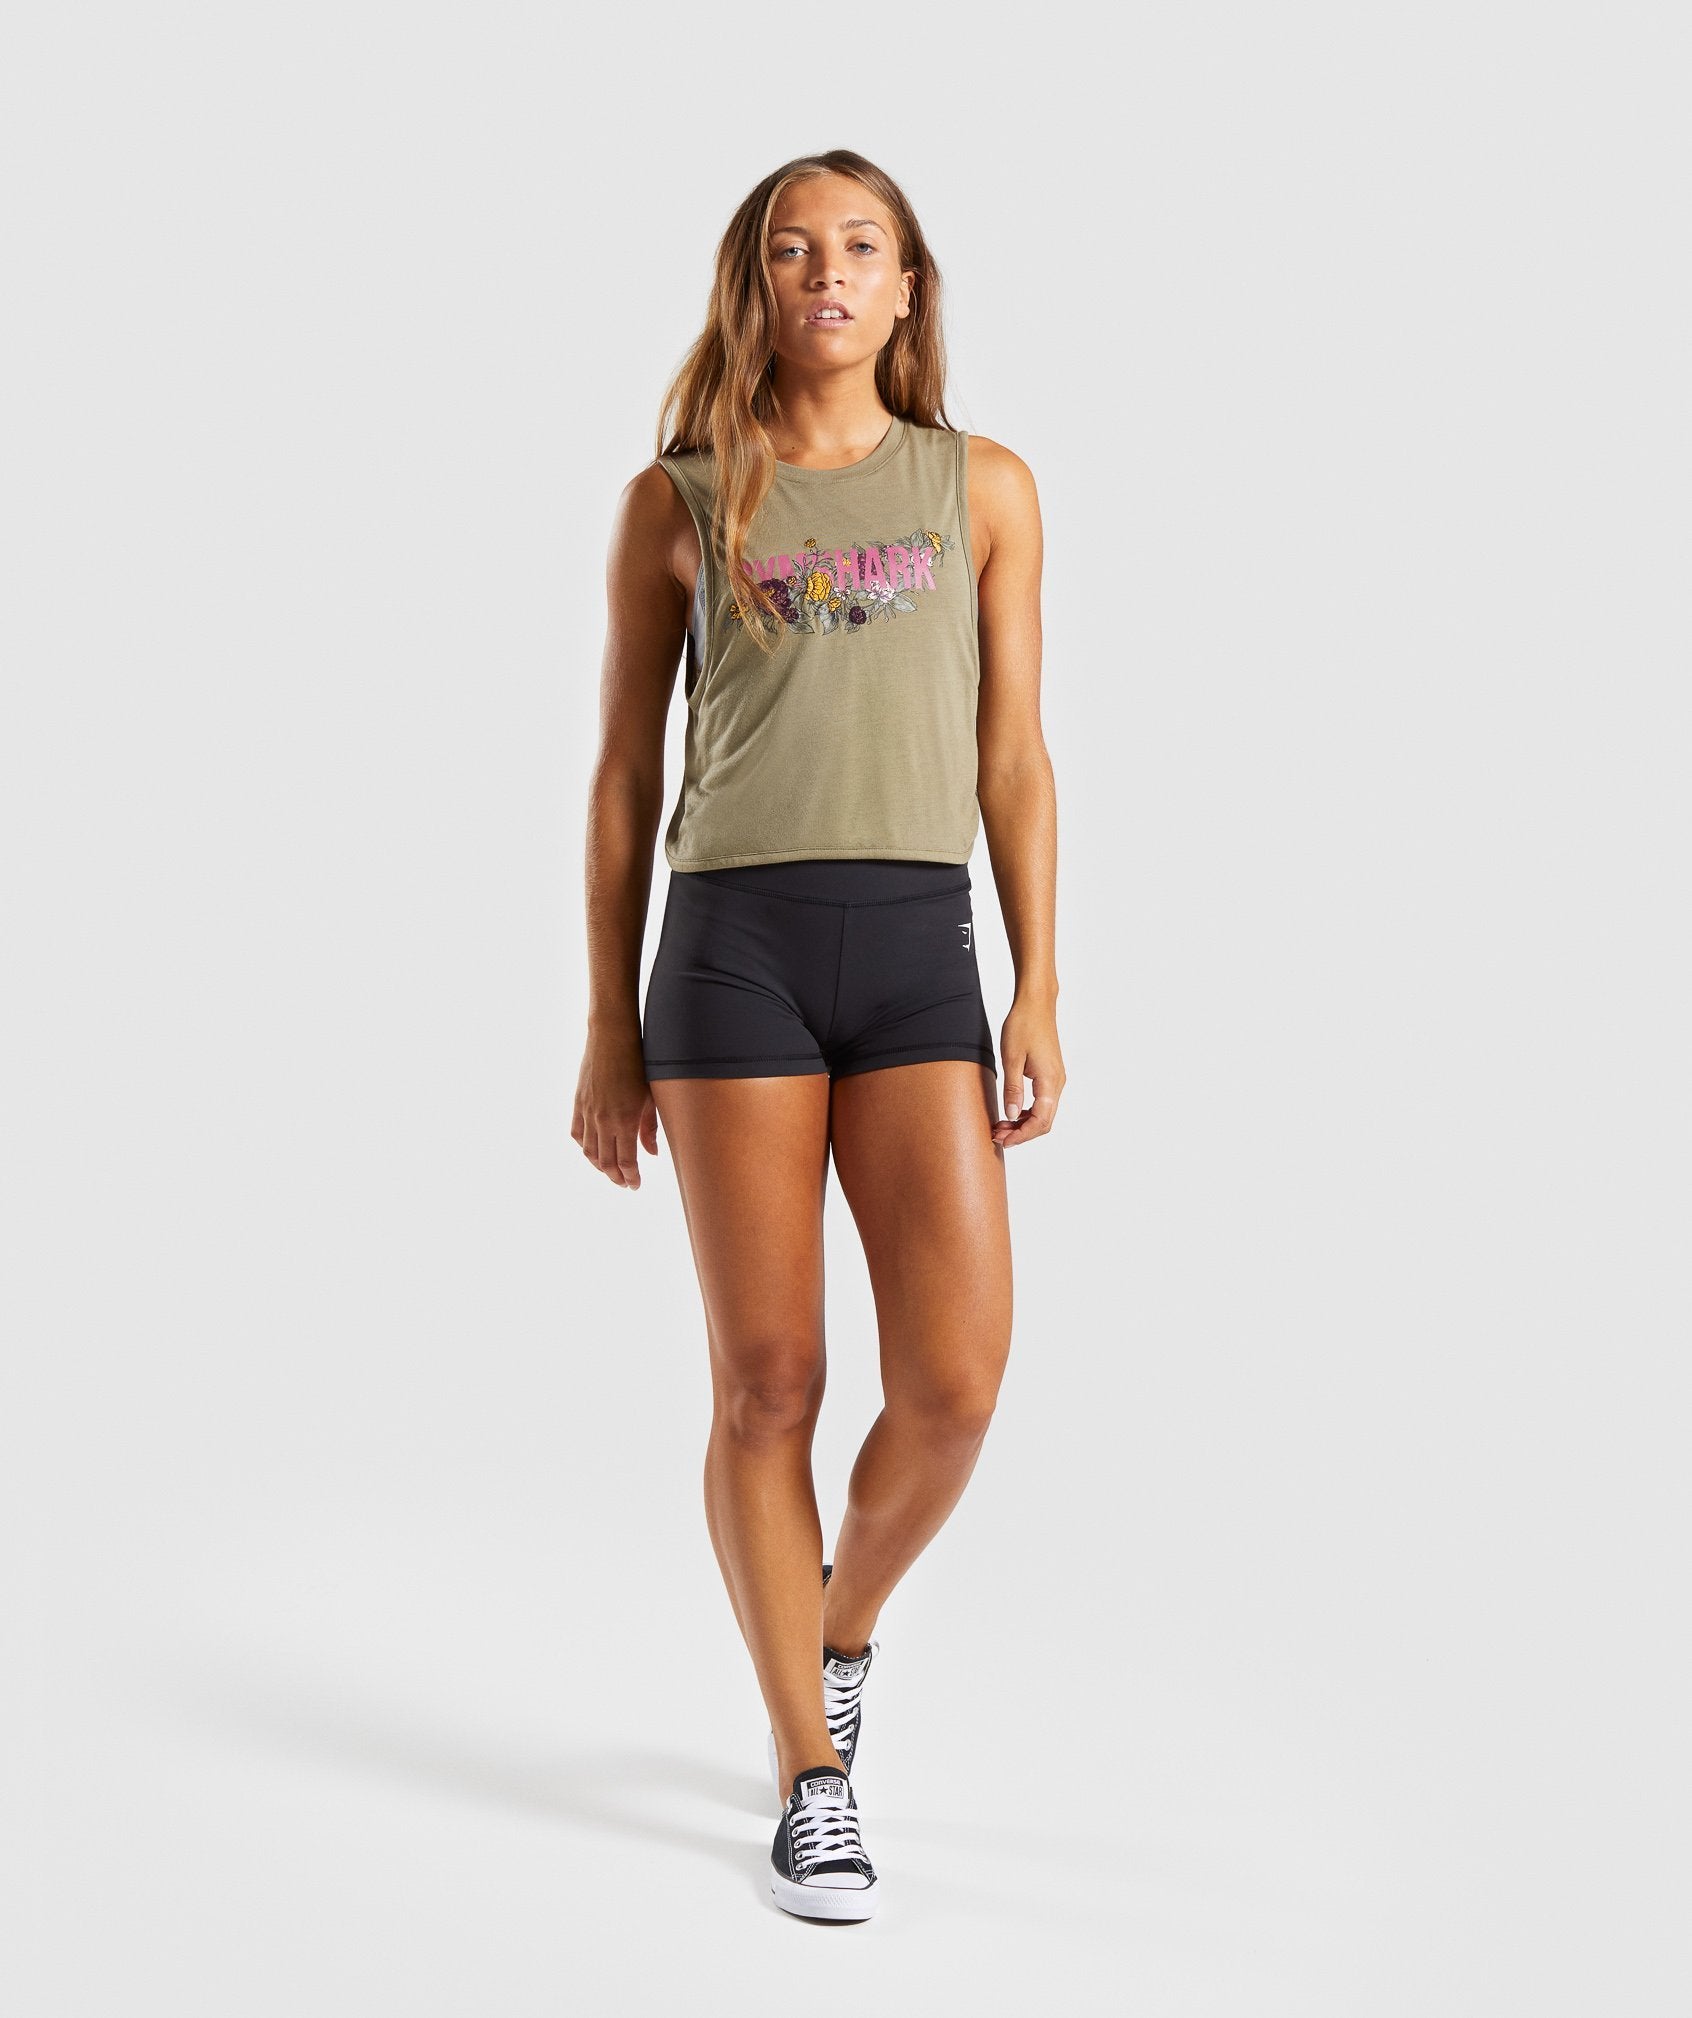 Floral Graphic Tank in Khaki - view 4